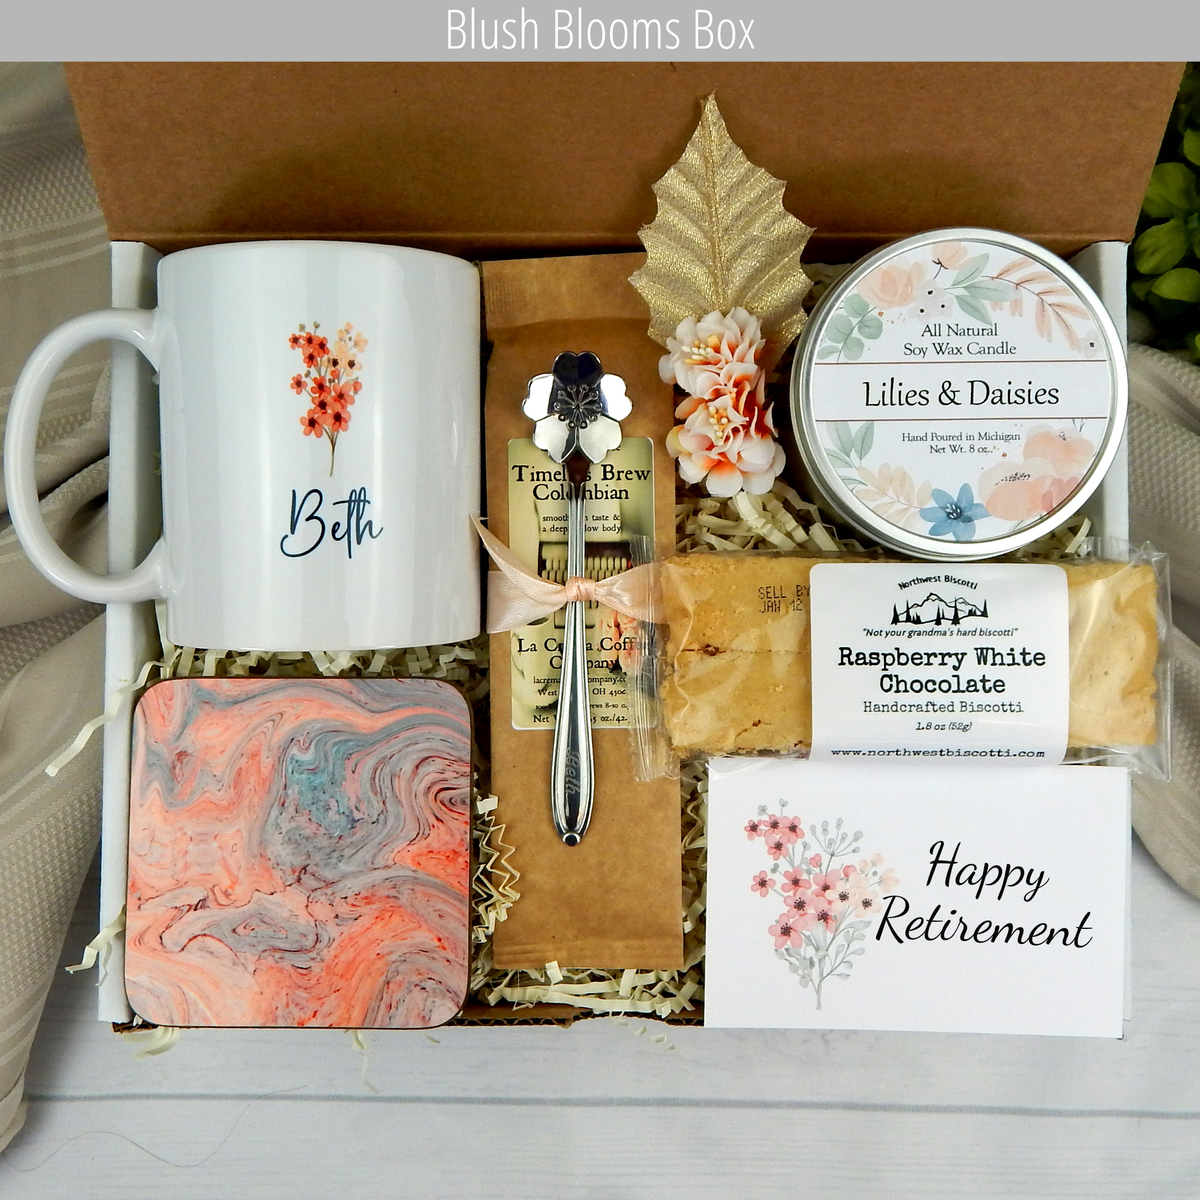 Happy Mother's Day mom or grandma gift box with drinkware option gift set